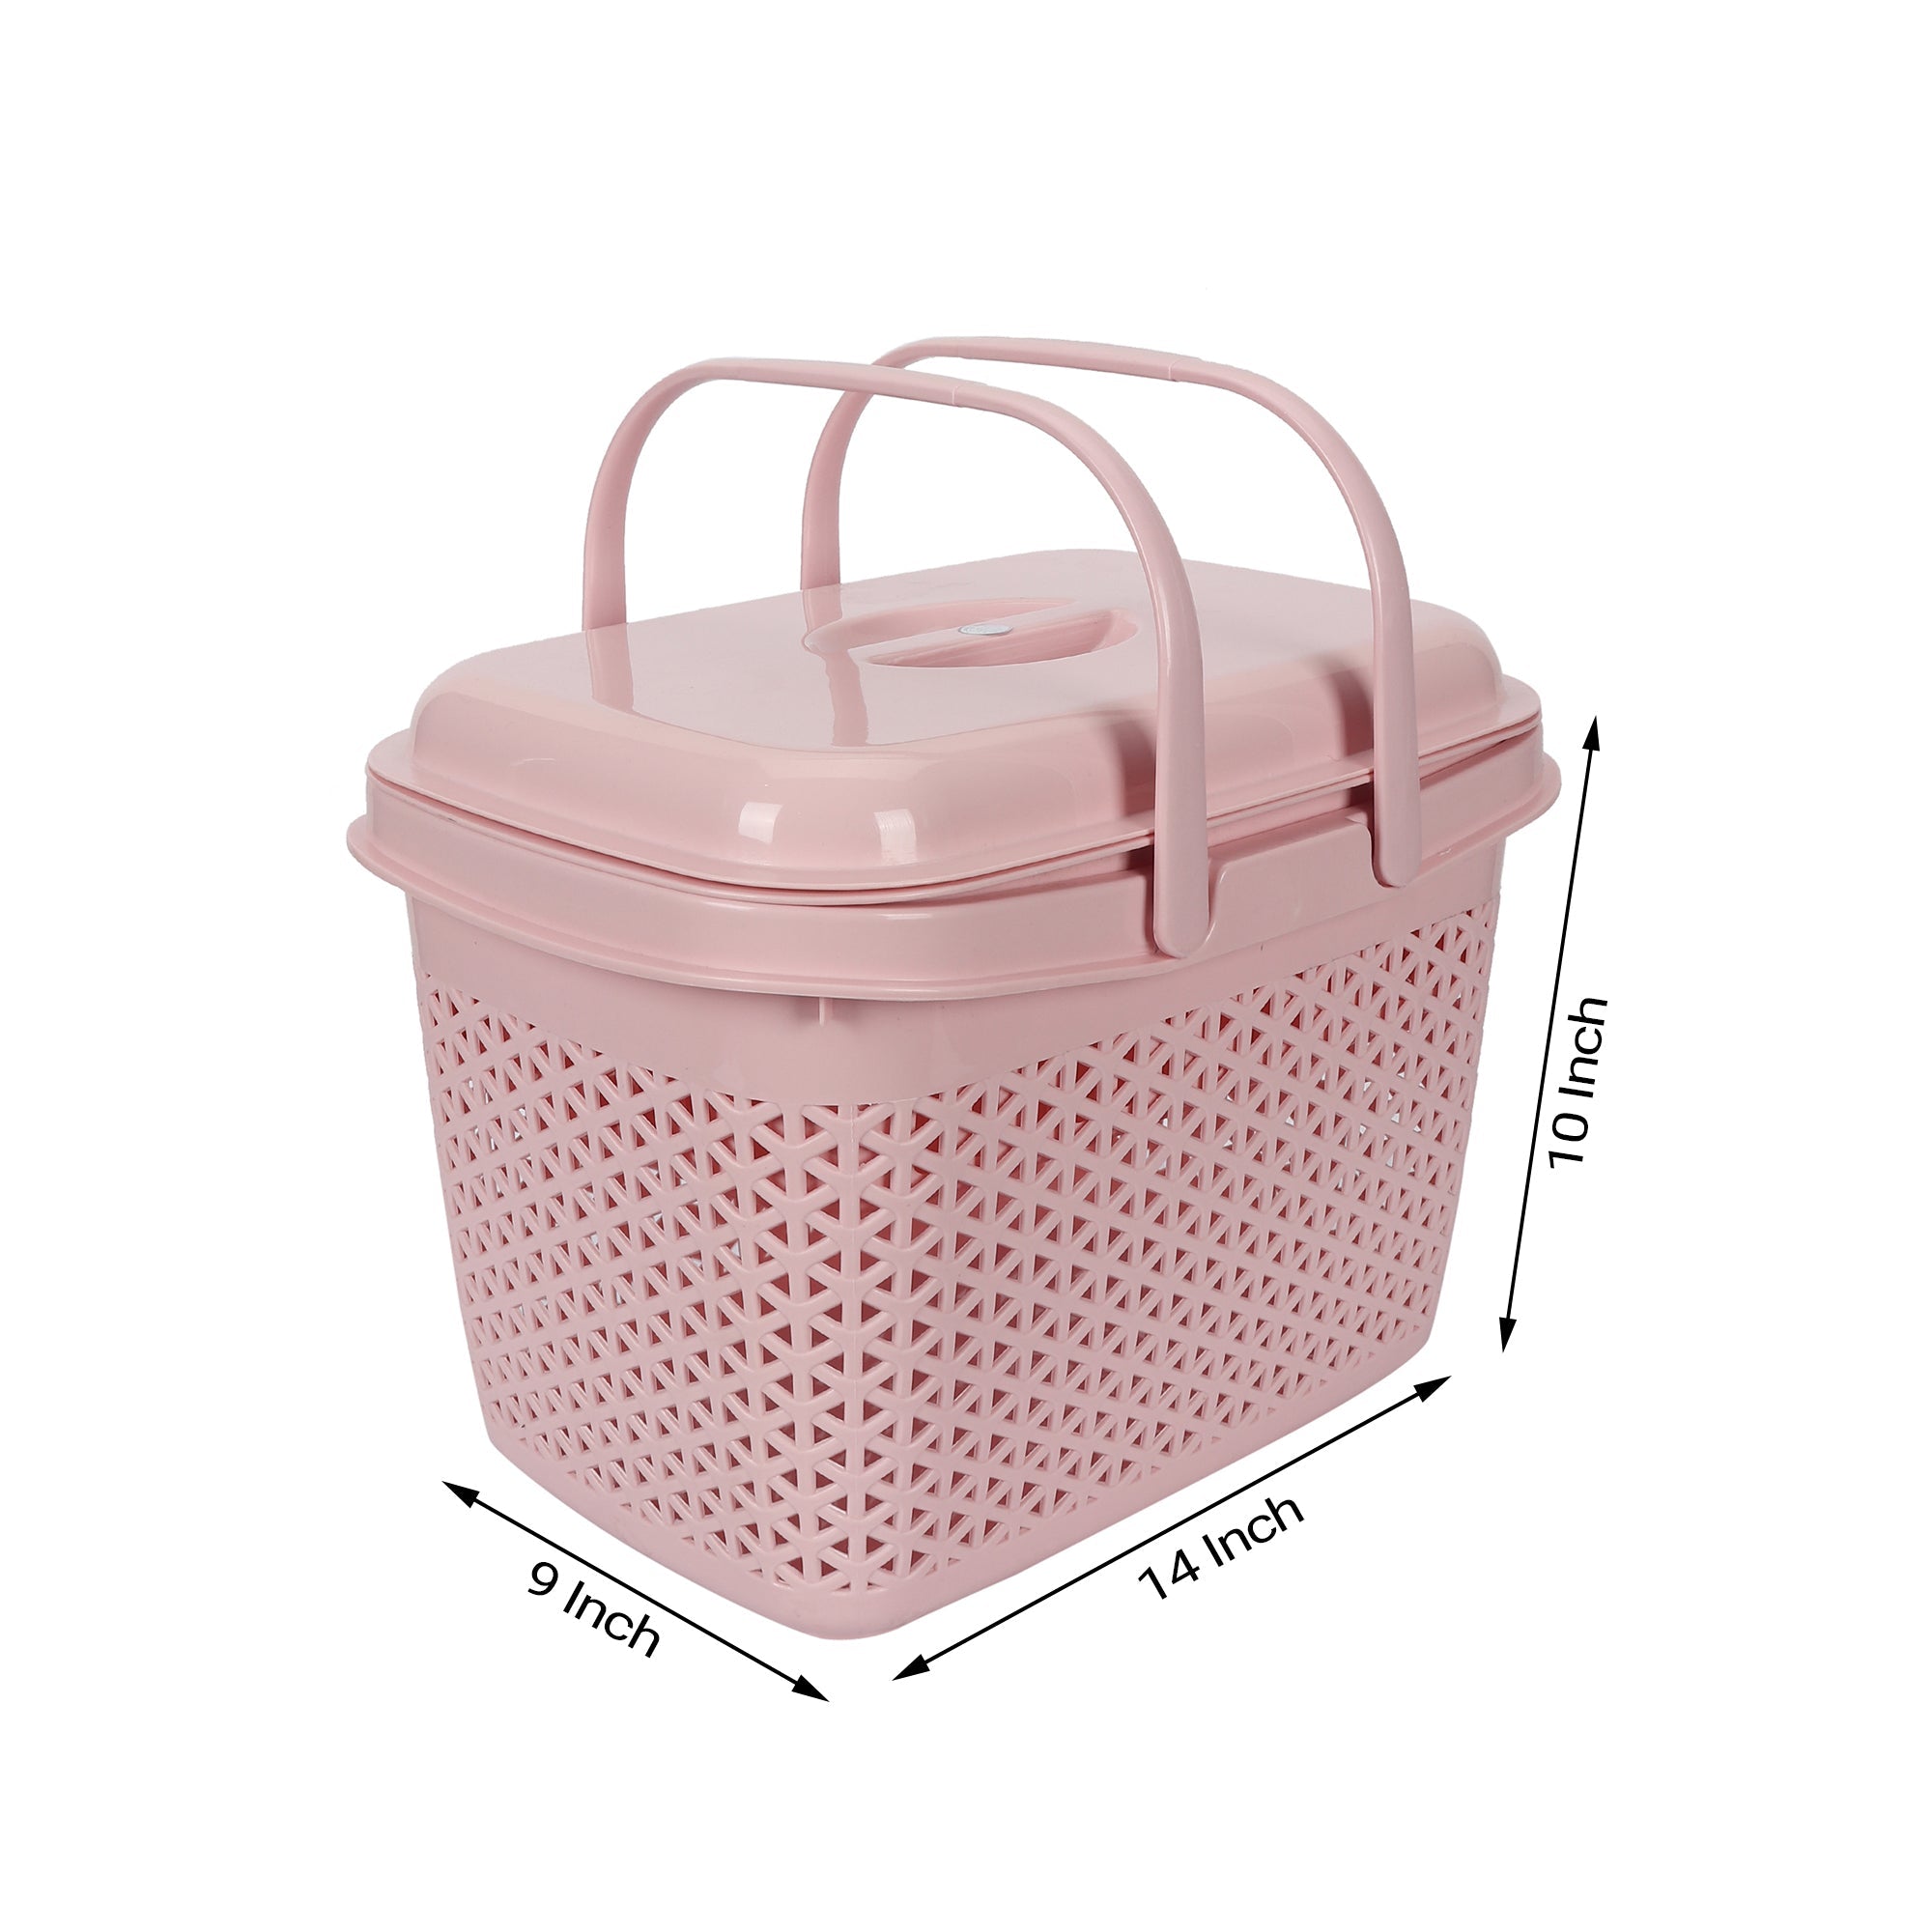 Plastic Lunch Basket with Lid  & Fruit/Cutlery Tray for Office, Home and Picnic Use. (14x9x10 Inch)